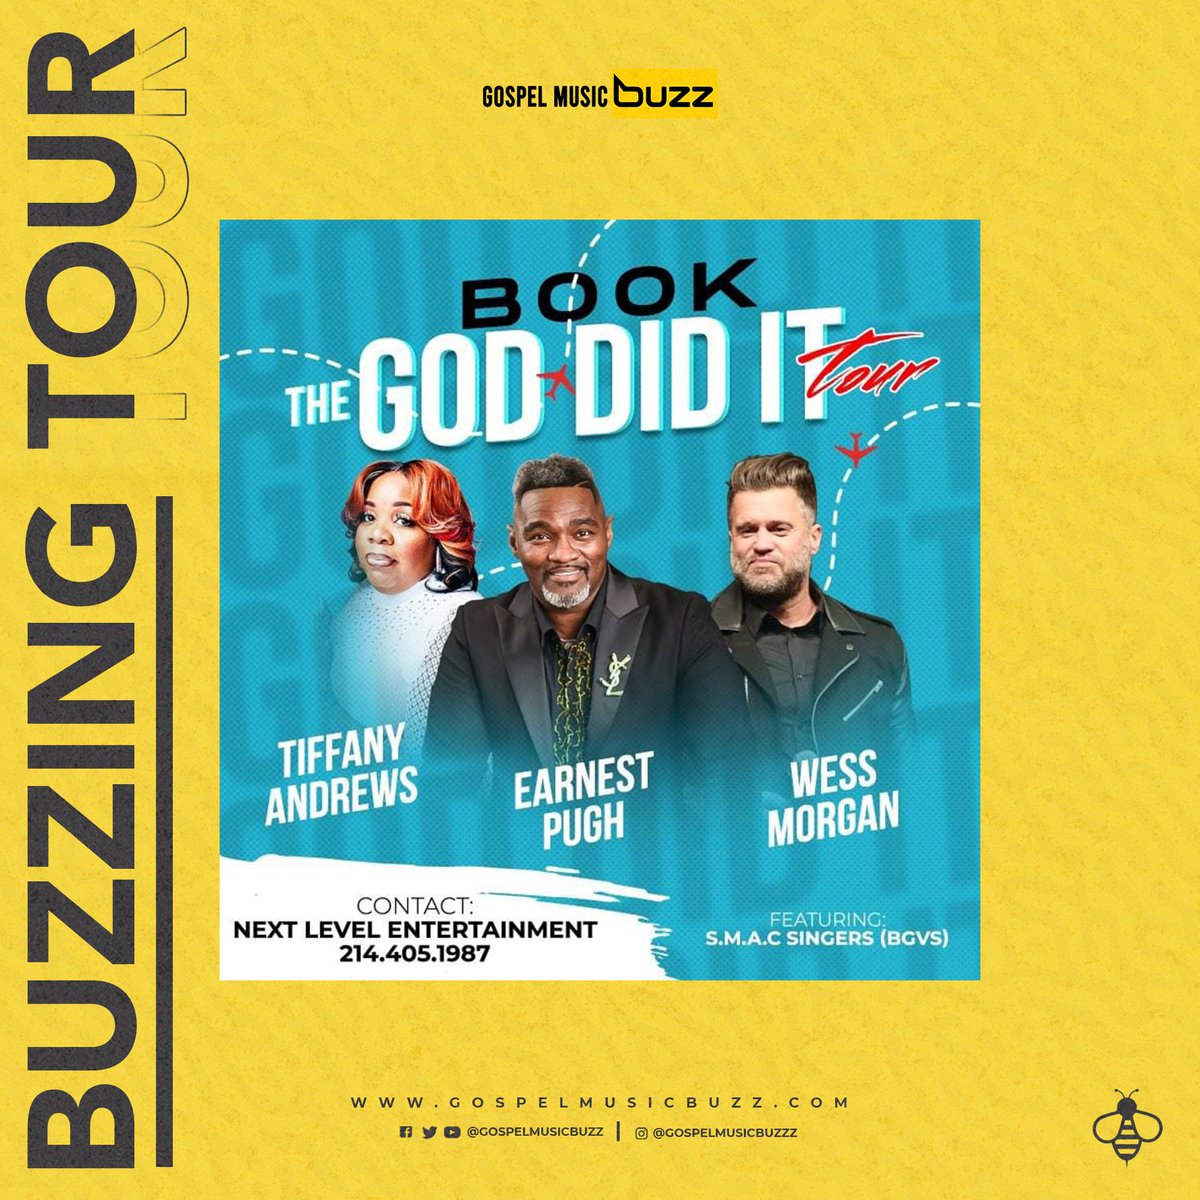 Calling all promoters and booking managers!  Book  the 'God Did It tour' featuring @earnestpugh, @WessMorgan, and @TiffanyAndrews. 

☎️: (214) 405- 1987

.
#NewTour #GodDidIt #Gospelmusic #EarnestPugh #WesMorgan #TiffanyAndrews #GospelMusicbuzz🔁